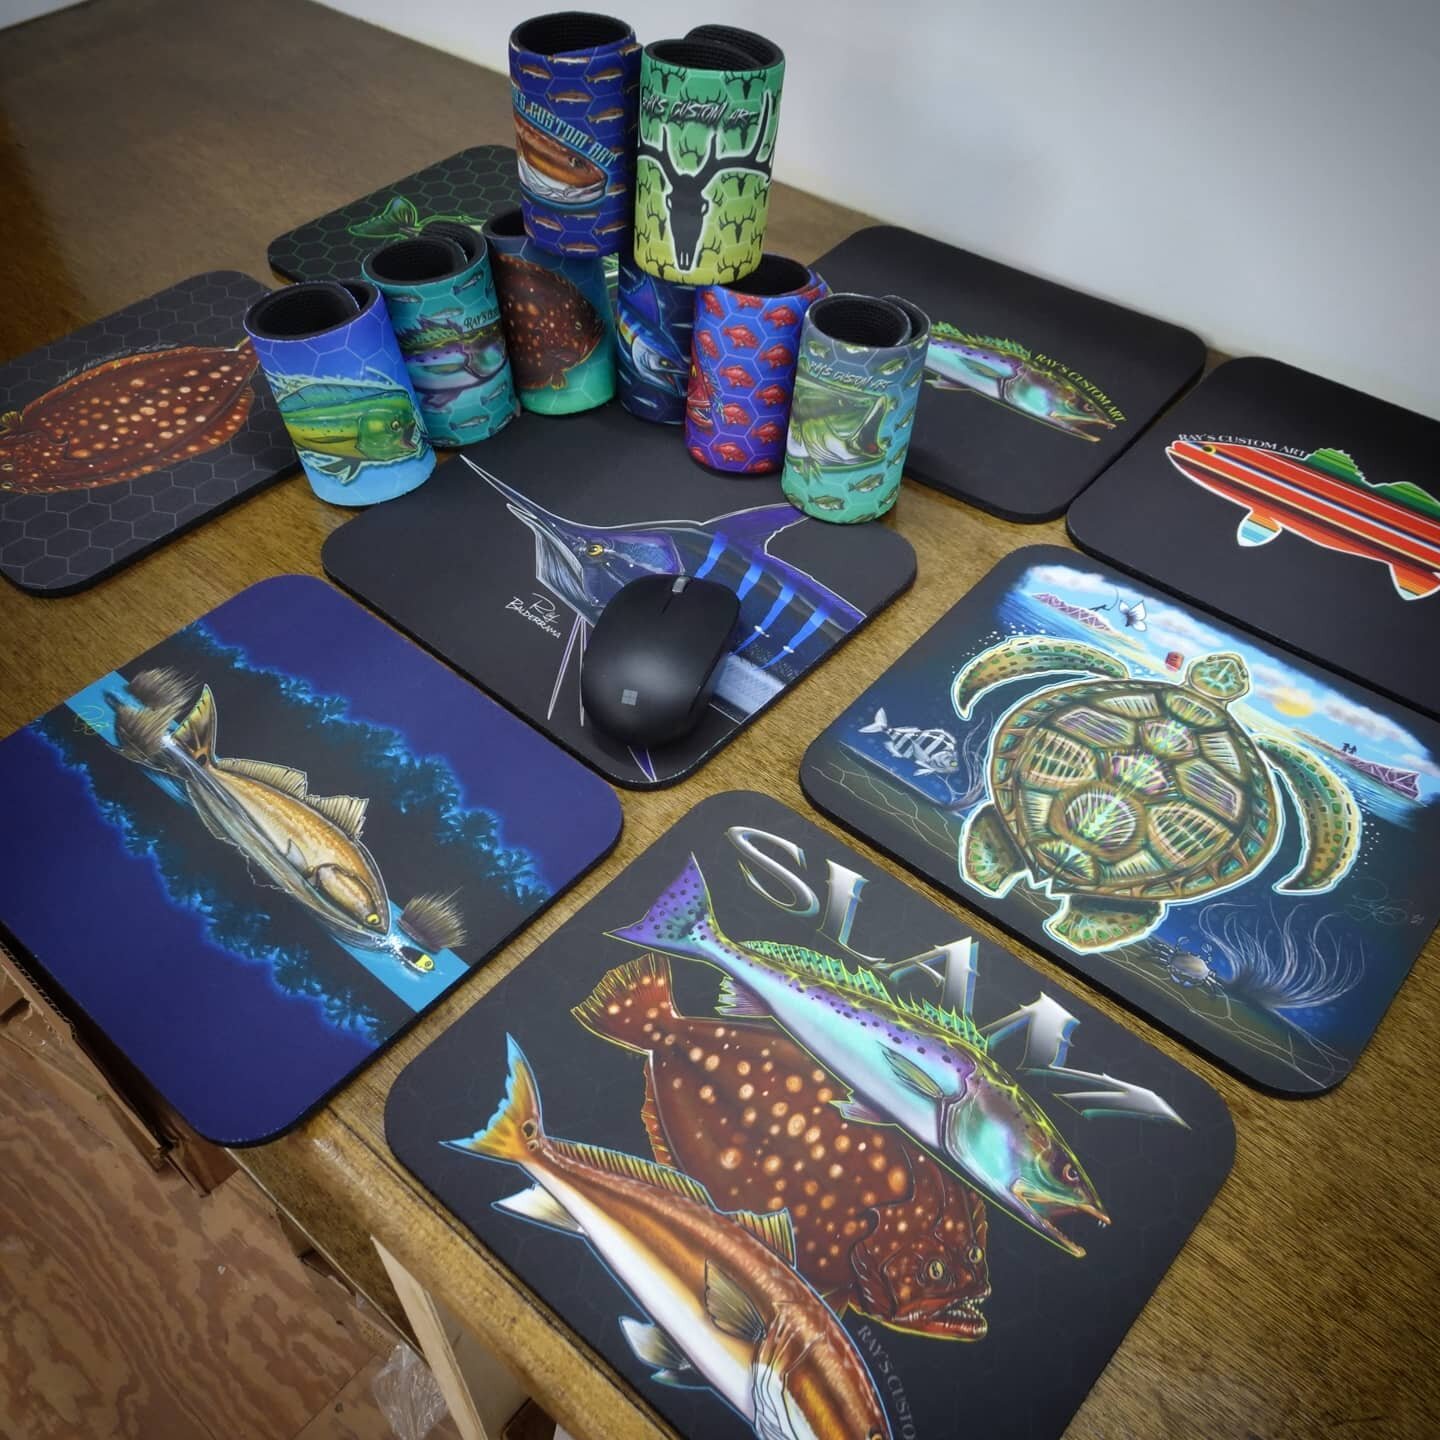 Unique mousepads and Koozies handmade in the USA. We create the most  Pristine art on the planet. If you want what nobody else has at an affordable price, visit our site.
#rayscustomart #fishing #fisherman #art #coast #flatsfishing #topwater #trout #